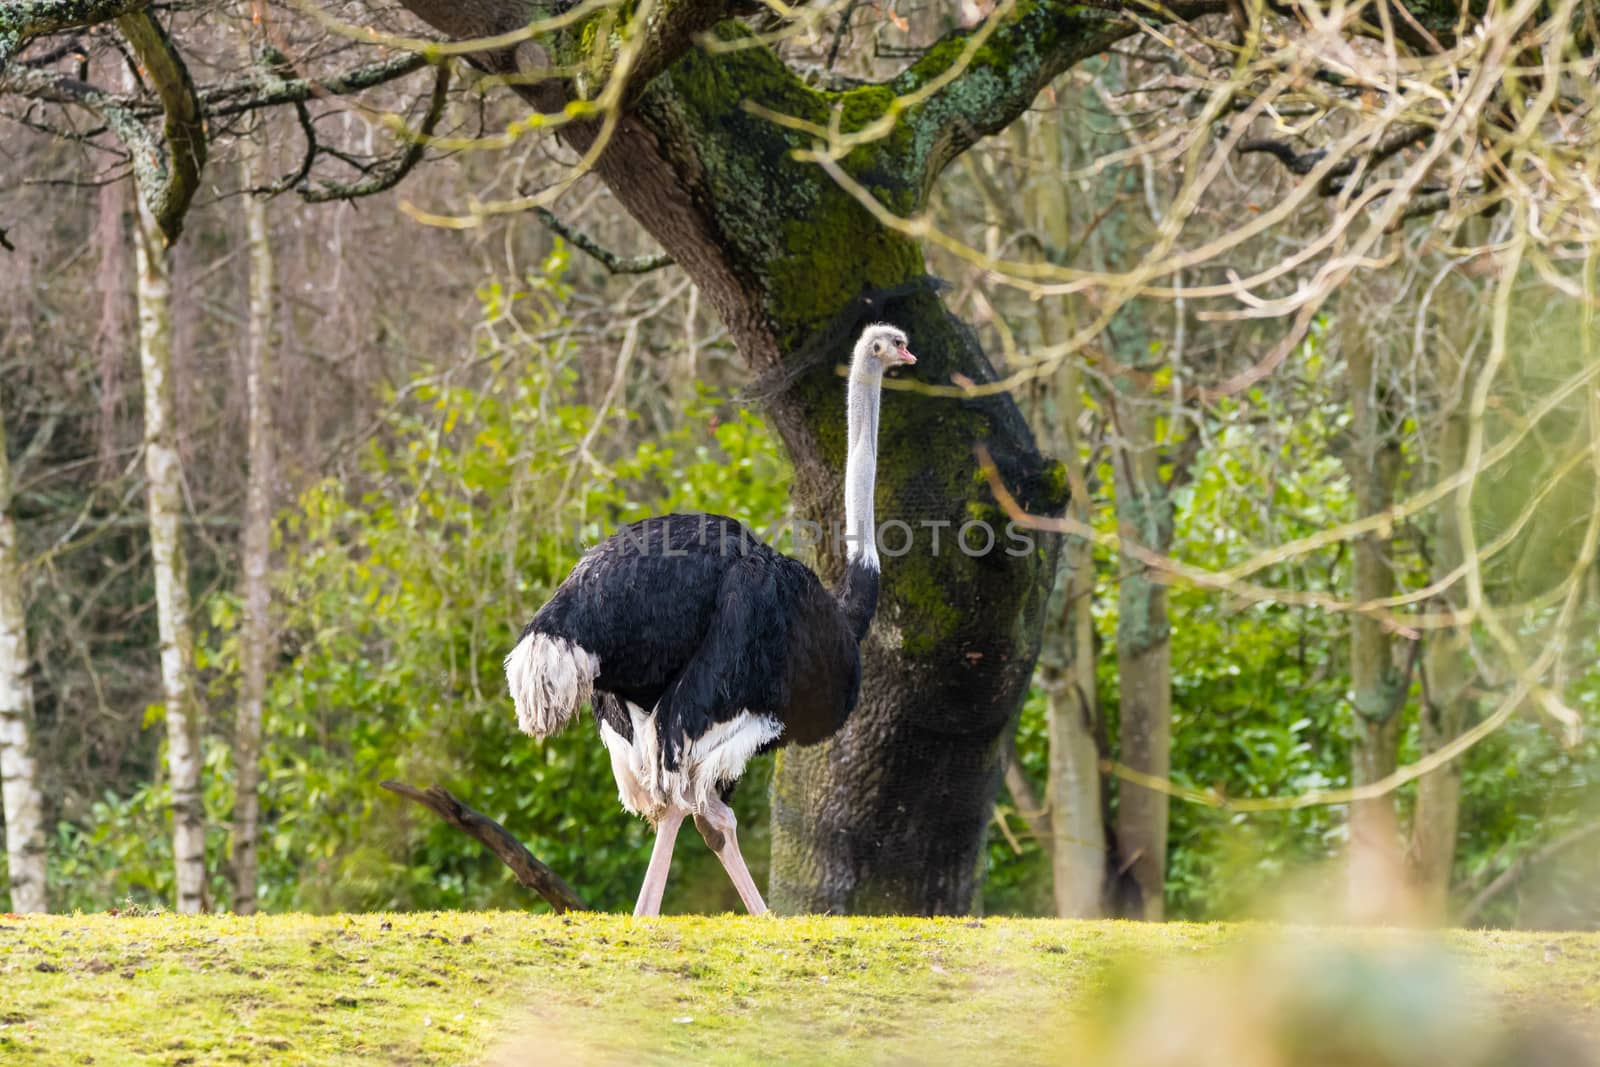 Ostrich at zoo by cestes001